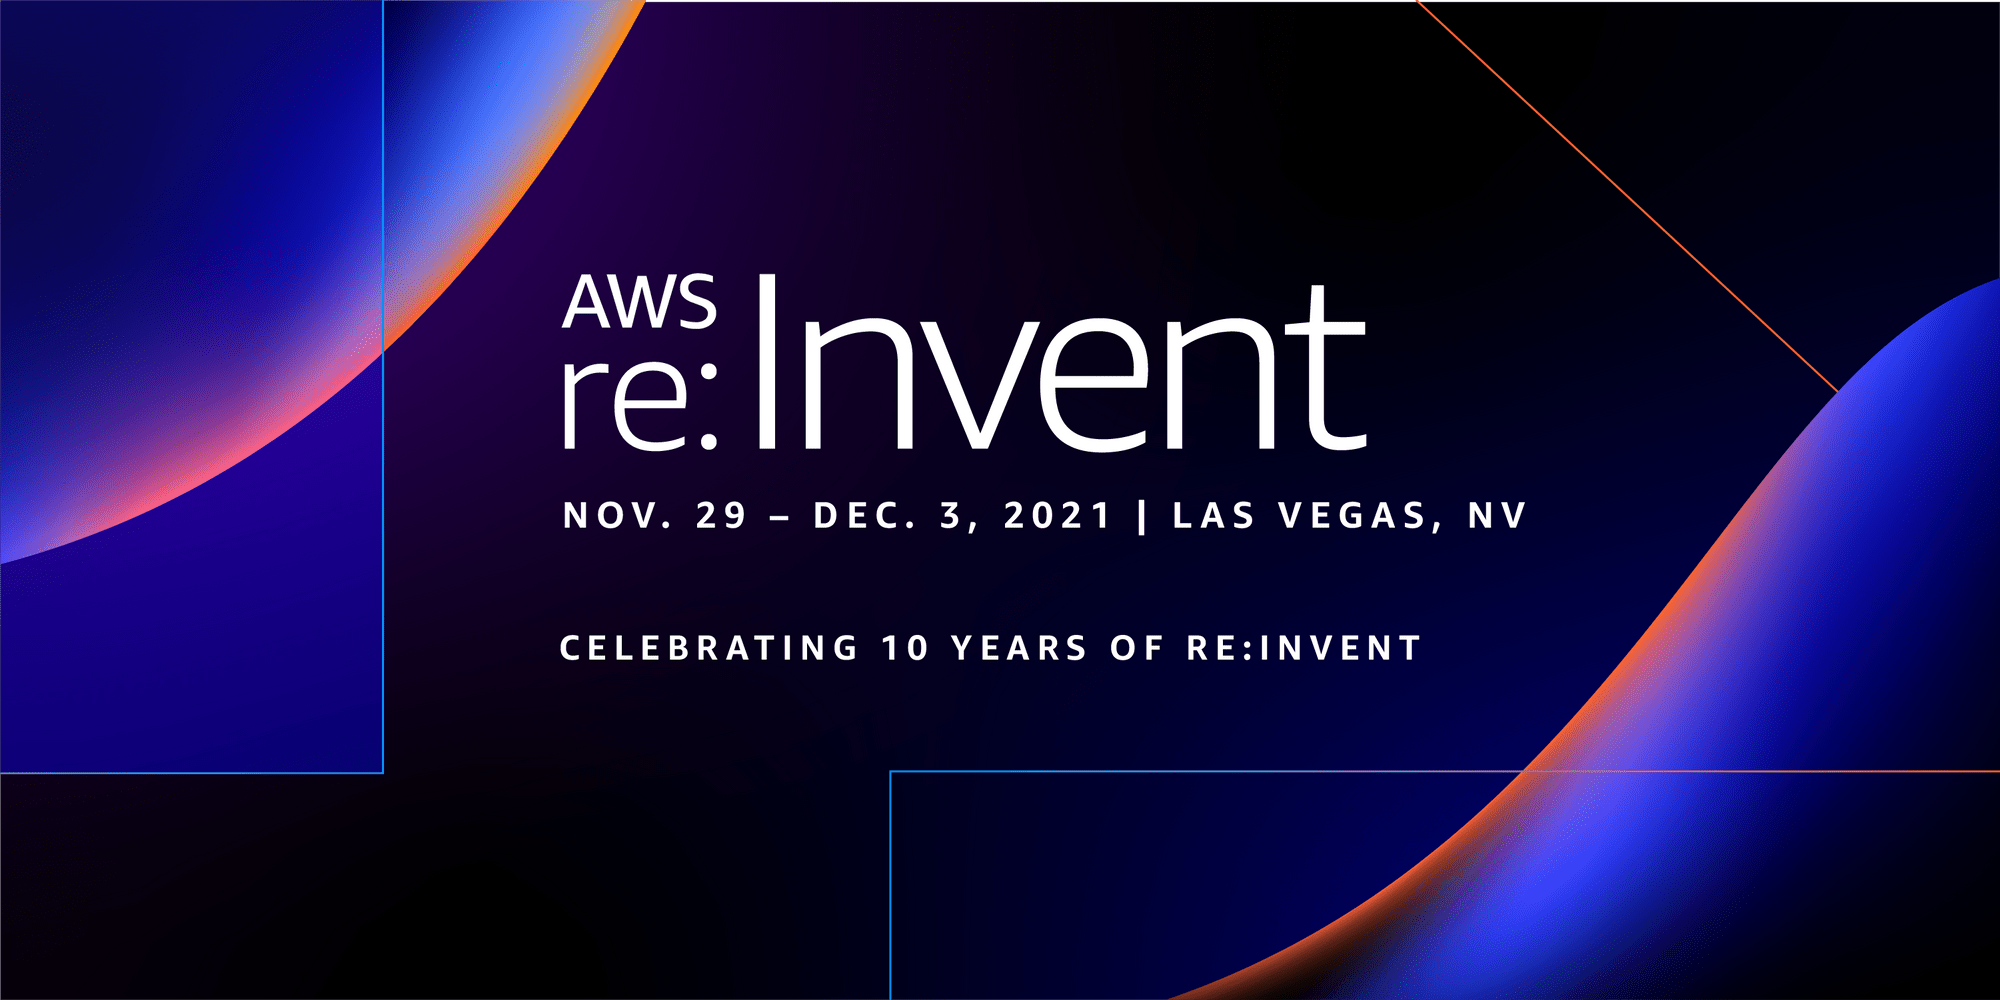 AWS re:Invent 2021 